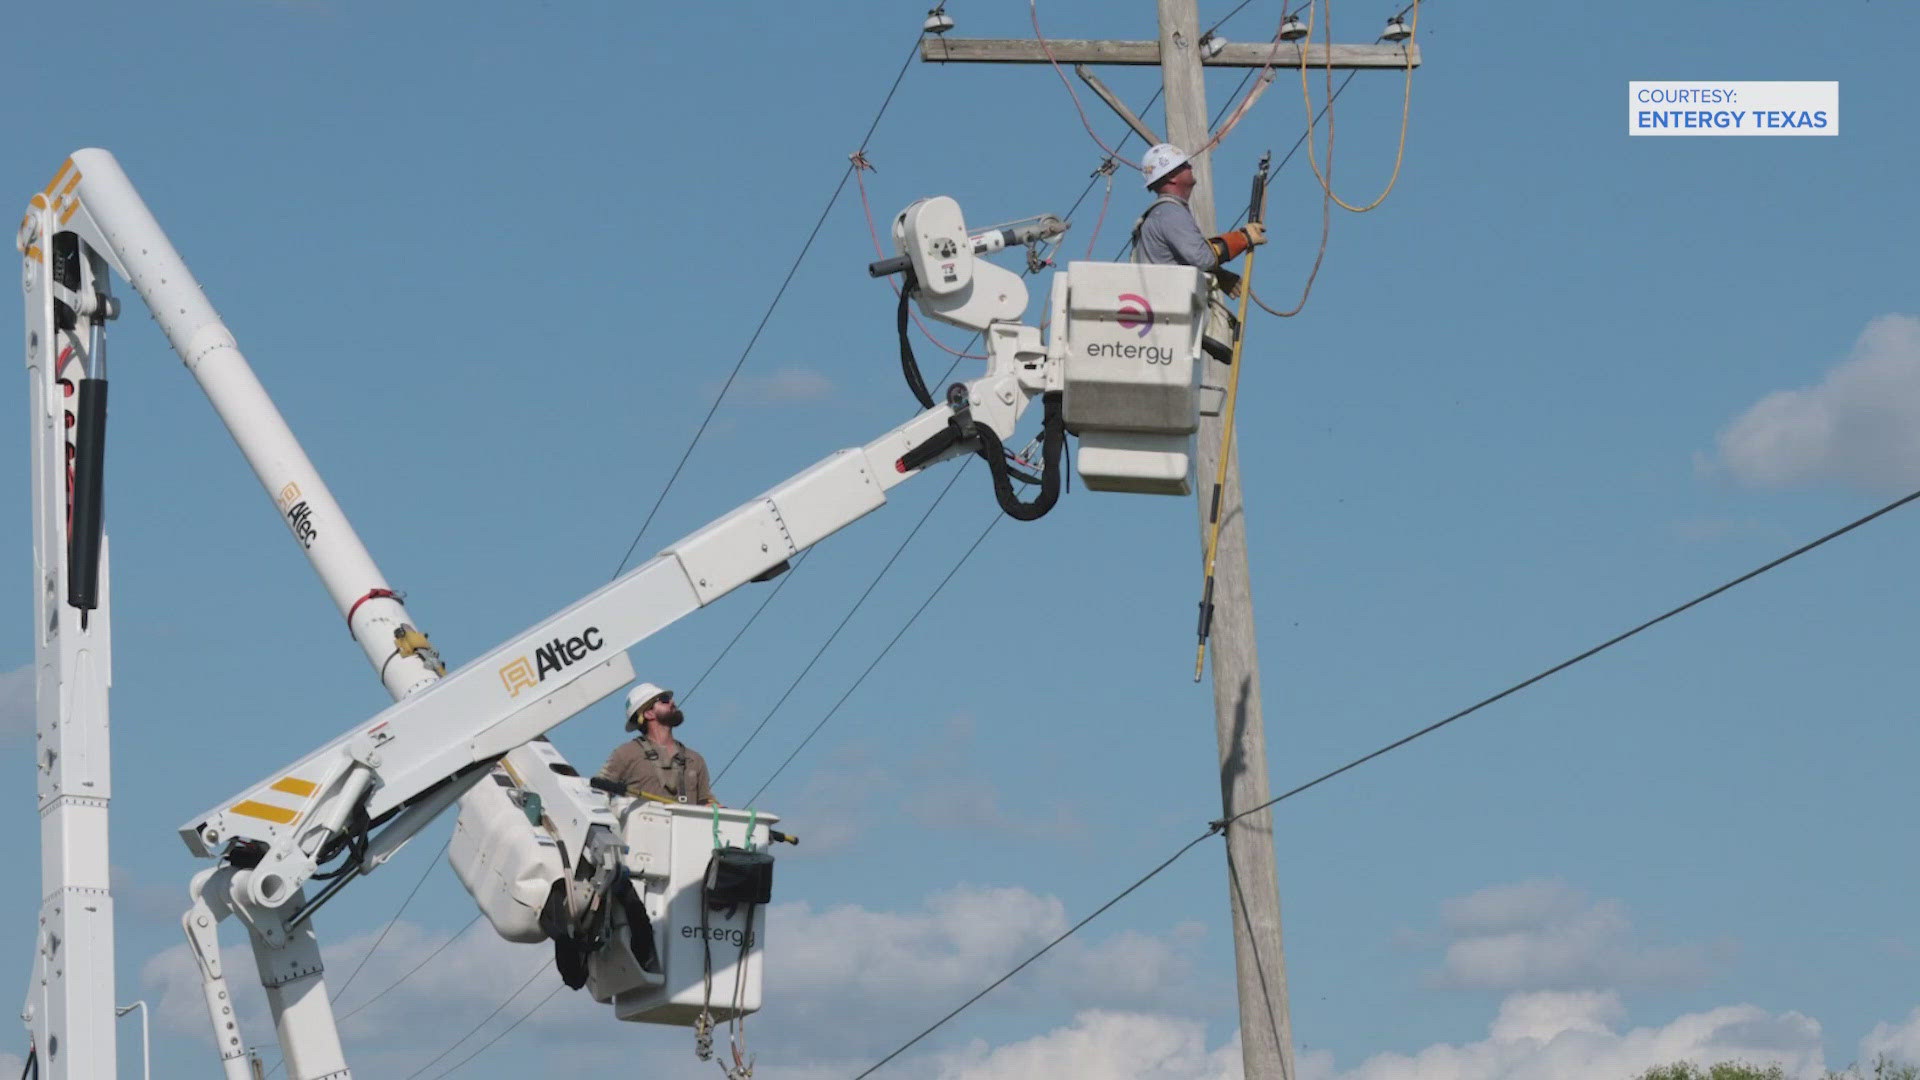 Entergy Texas has about 2,000 workers in the field addressing outages with help from out-of-state.